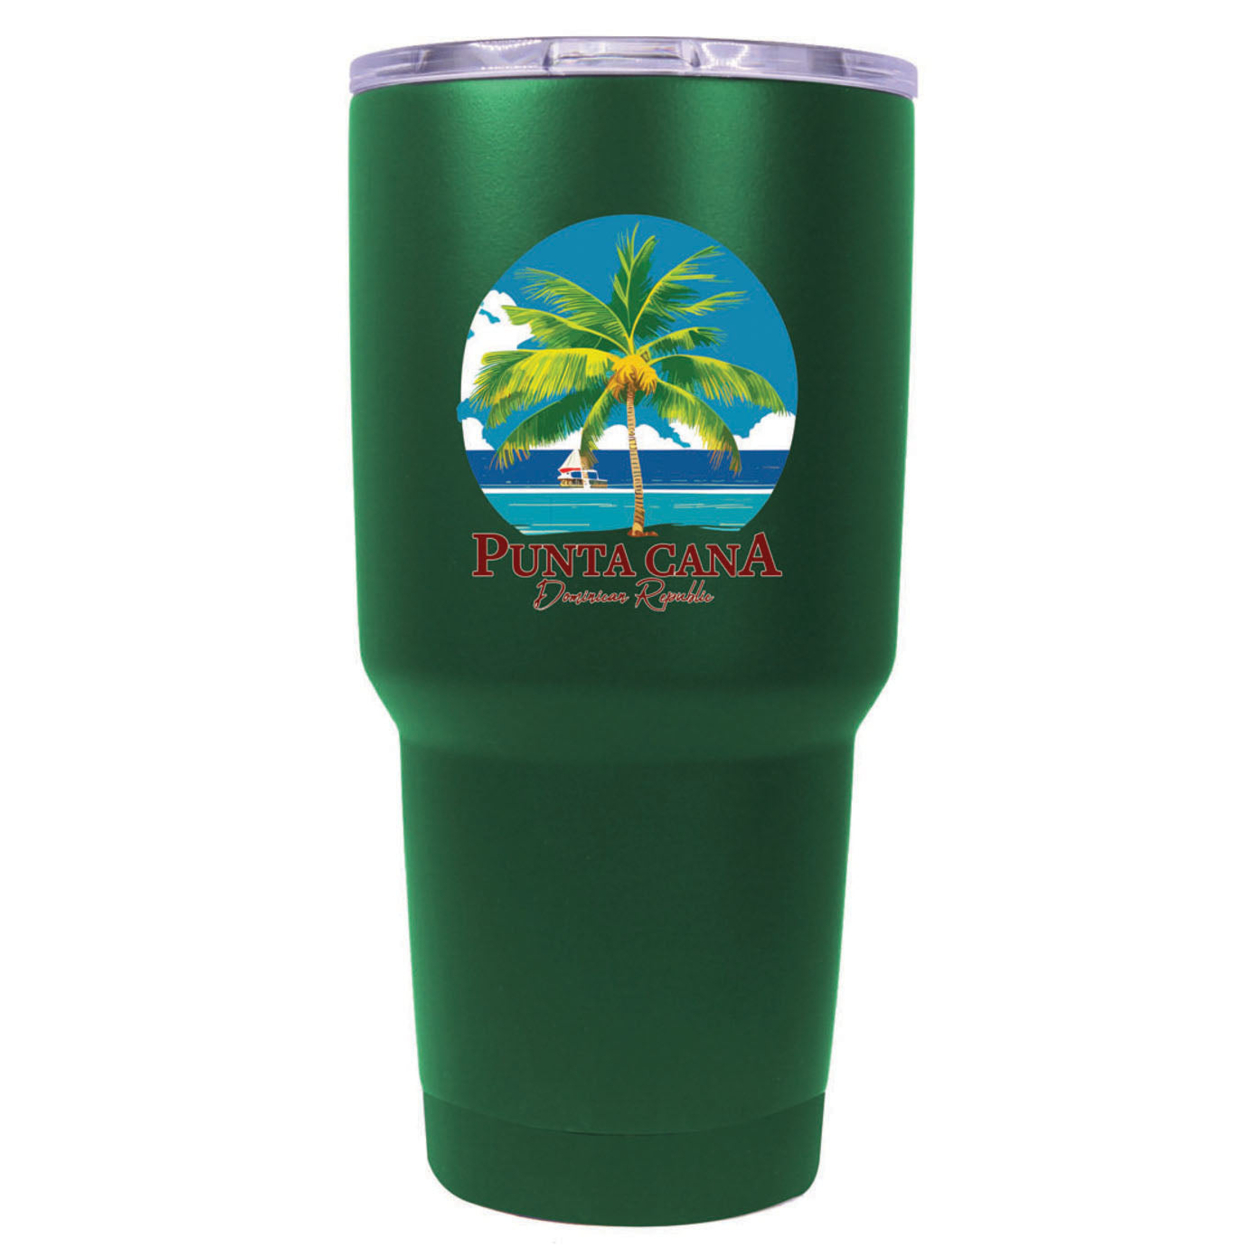 Punta Cana Dominican Republic Souvenir 24 Oz Insulated Stainless Steel Tumbler - White, PARROT B